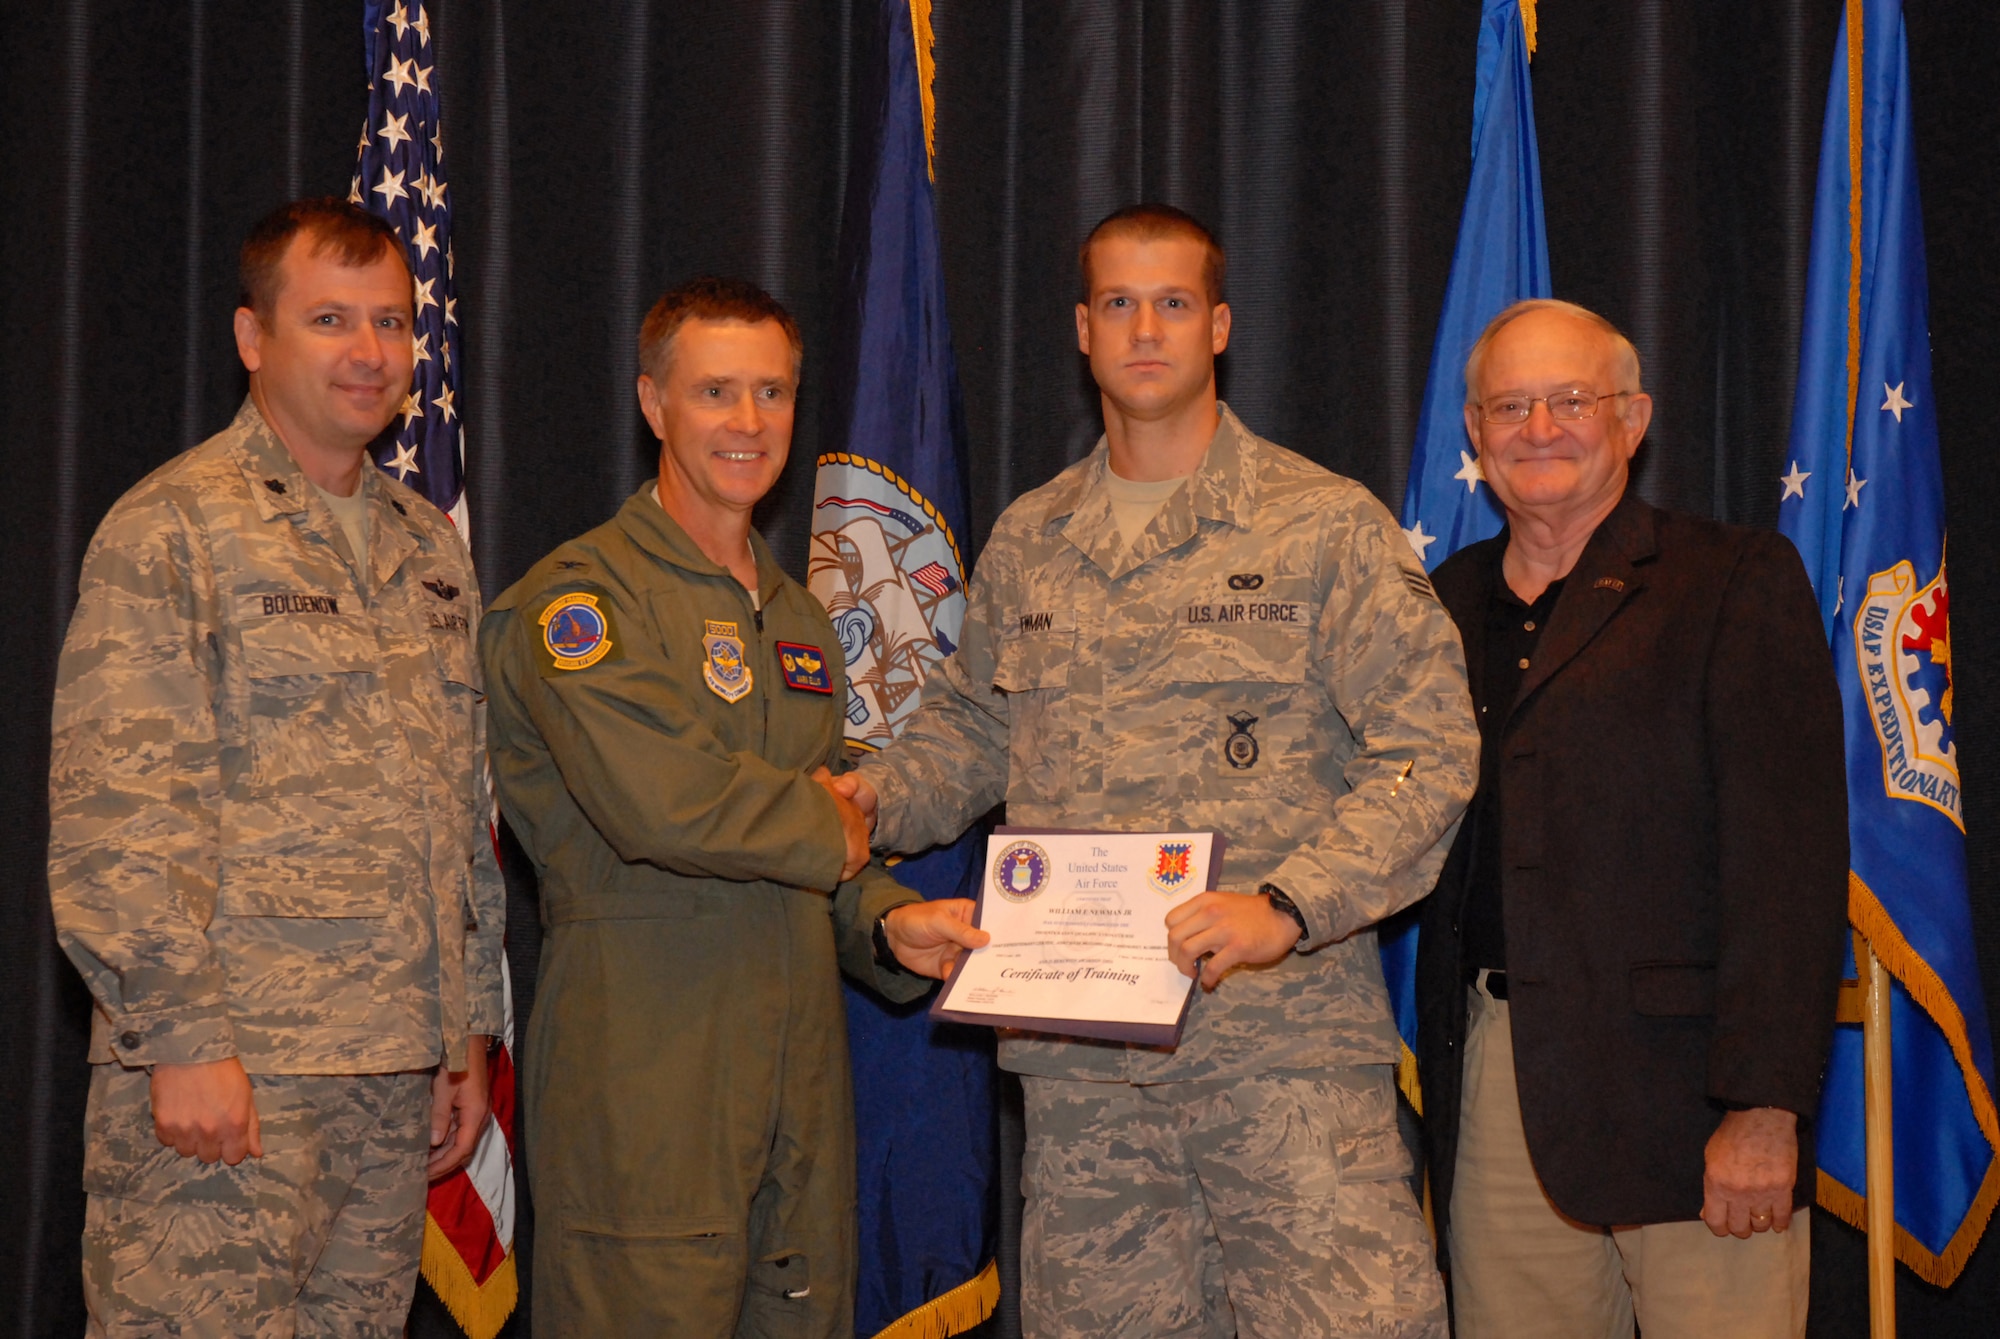 The 2,000th security forces Phoenix Raven, Senior Airman William Newman Jr. (right-center), from the 811th Security Forces Squadron at Joint Base Andrews, Md., receives his certificate of completion from the Phoenix Raven Training Course from Col. Mark Ellis, U.S. Air Force Expeditionary Operations School Commandant (left-center), accompanied by retired Col. Lawrence "Rocky" Lane (right) and Lt. Col. Rhett Boldenow (left), 421st Combat Training Squadron commander, during Raven graduation ceremonies at the U.S. Air Force Expeditionary Center on Sept. 22, 2011, at Joint Base McGuire-Dix-Lakehurst, N.J.  (U.S. Air Force photo/Tech. Sgt. Paul R. Evans)